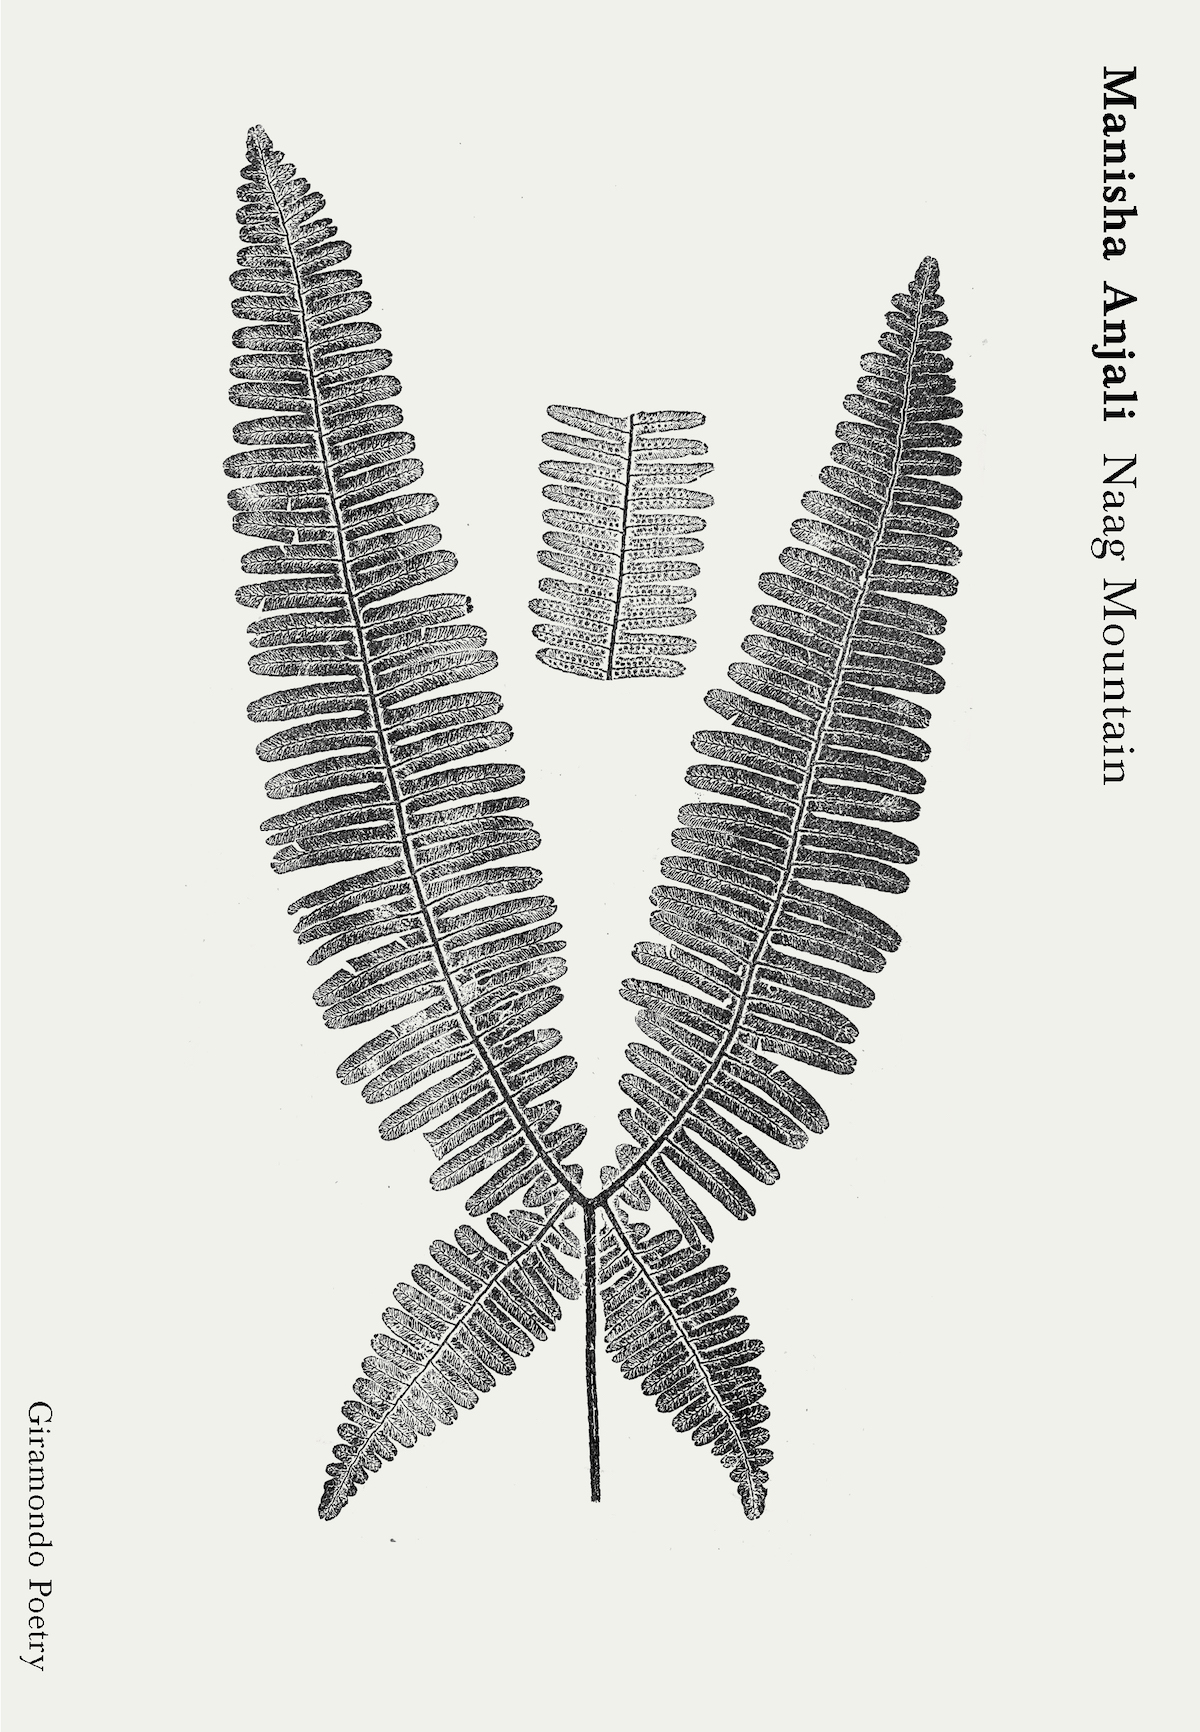 A book cover showing a black and white illustration of fern fronds